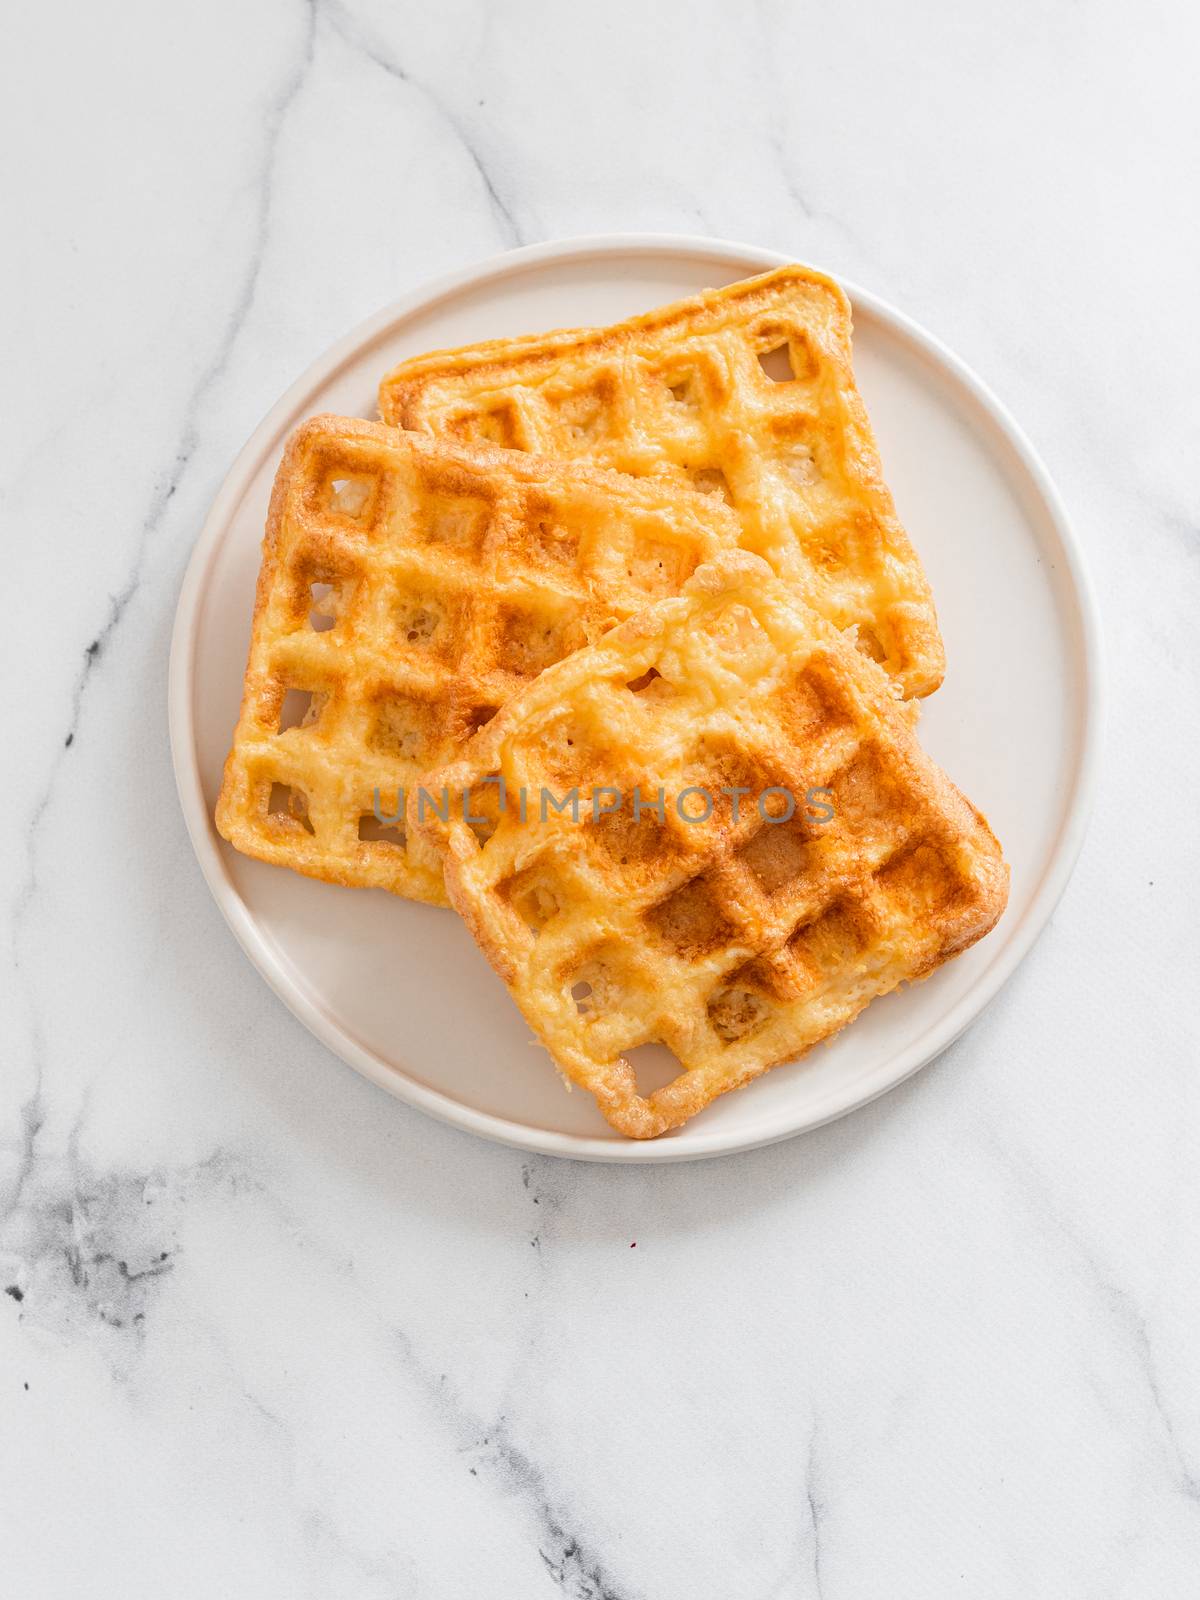 Perfect savory keto waffles. Two ingredients chaffles on plate over white marble background. Eggs and parmesan cheese low carb waffles. Top view or flat lay. Copy space for text or design. Vertical.